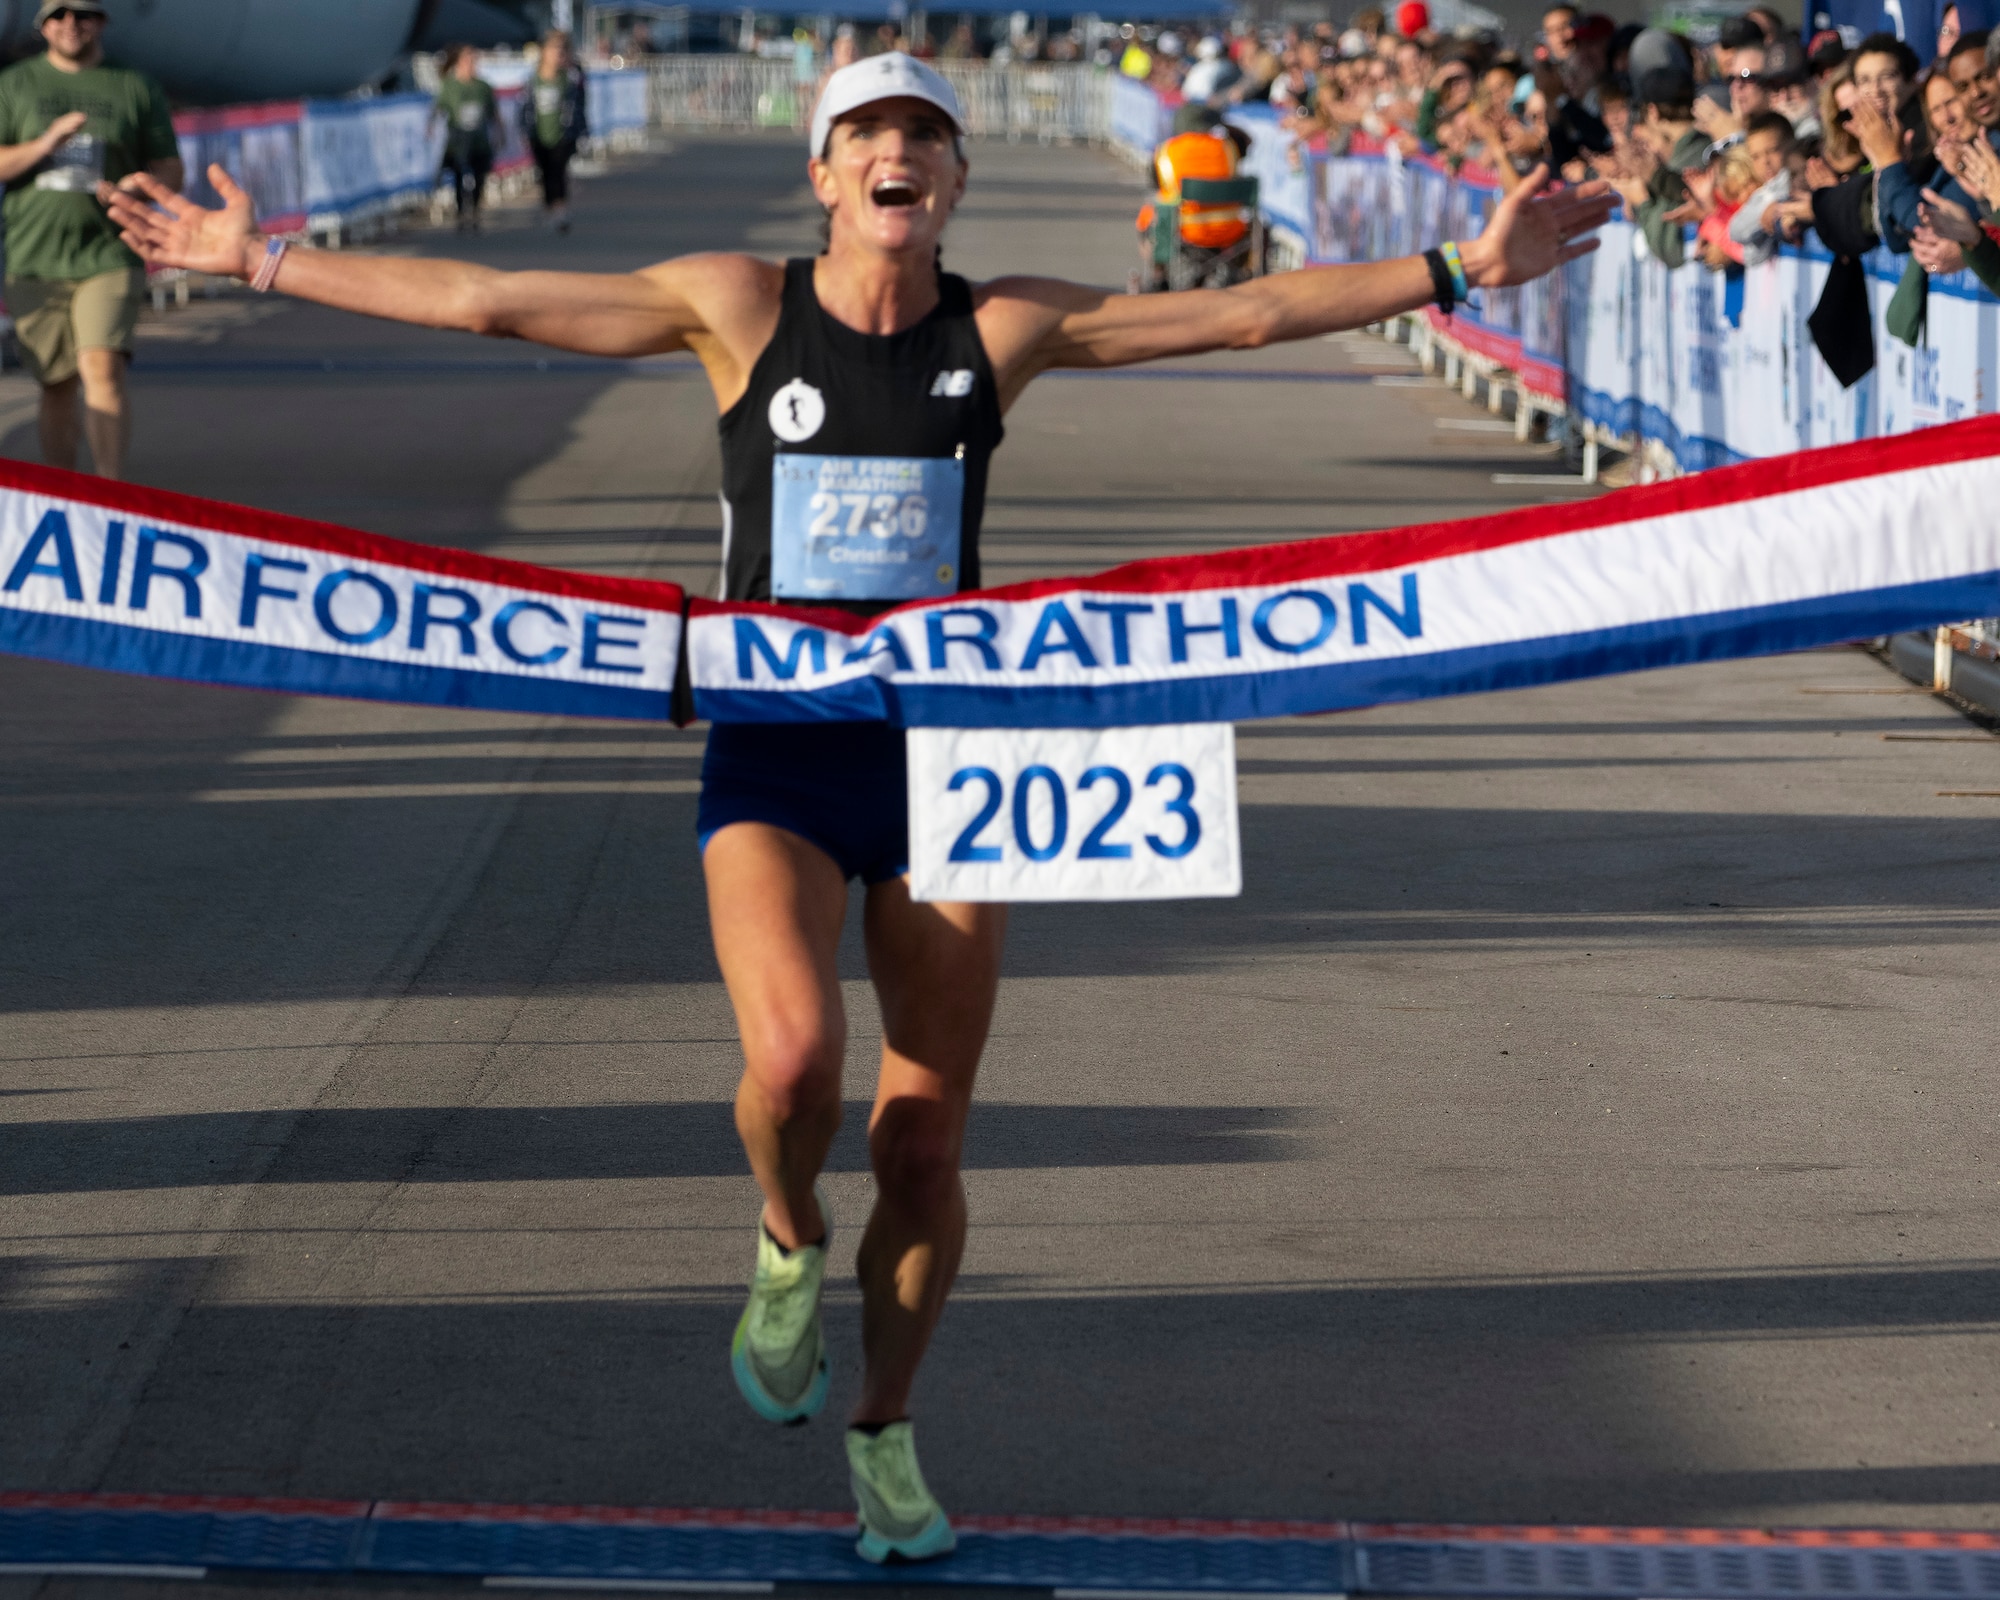 A woman stretches out her arms as she approaches a banner that has "Air Force Marathon" on it.